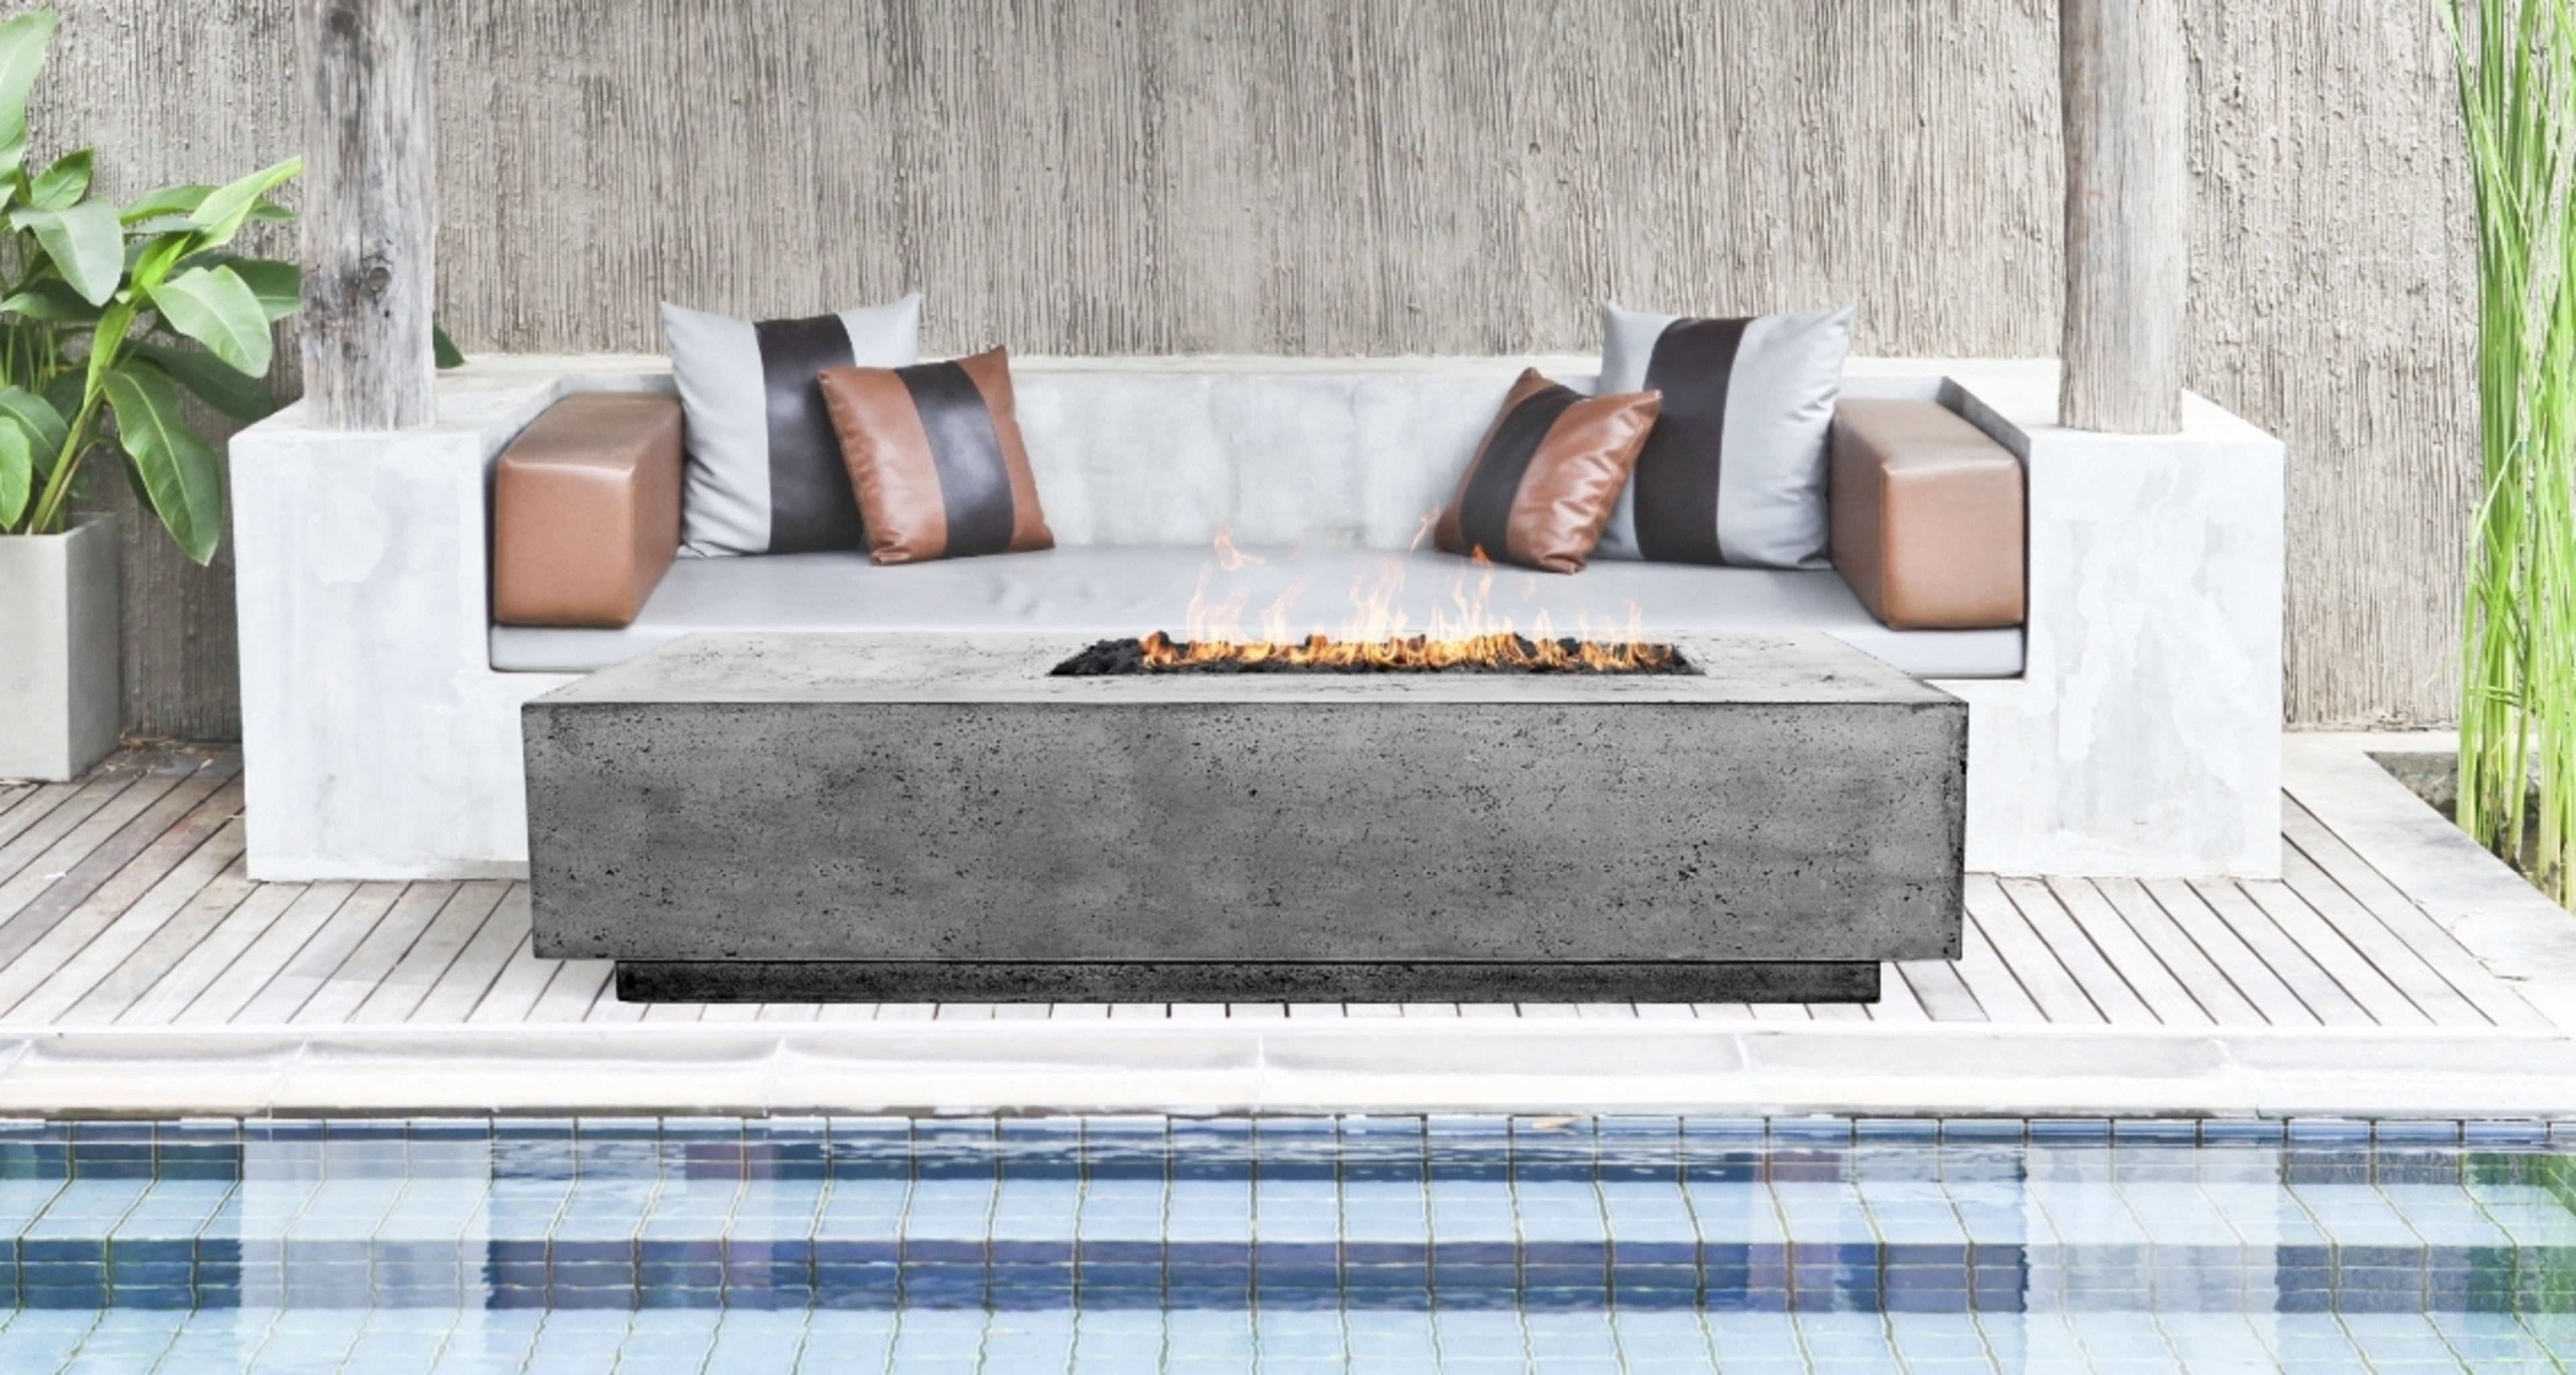 <p>Handcrafted using a custom patina finishing process, Prism Hardscapes fire pits offer superior craftsmanship and style. Designed to last outdoors, each Prism Hardscapes fire pit features a unique finish and one-of-a-kind appeal.</p>